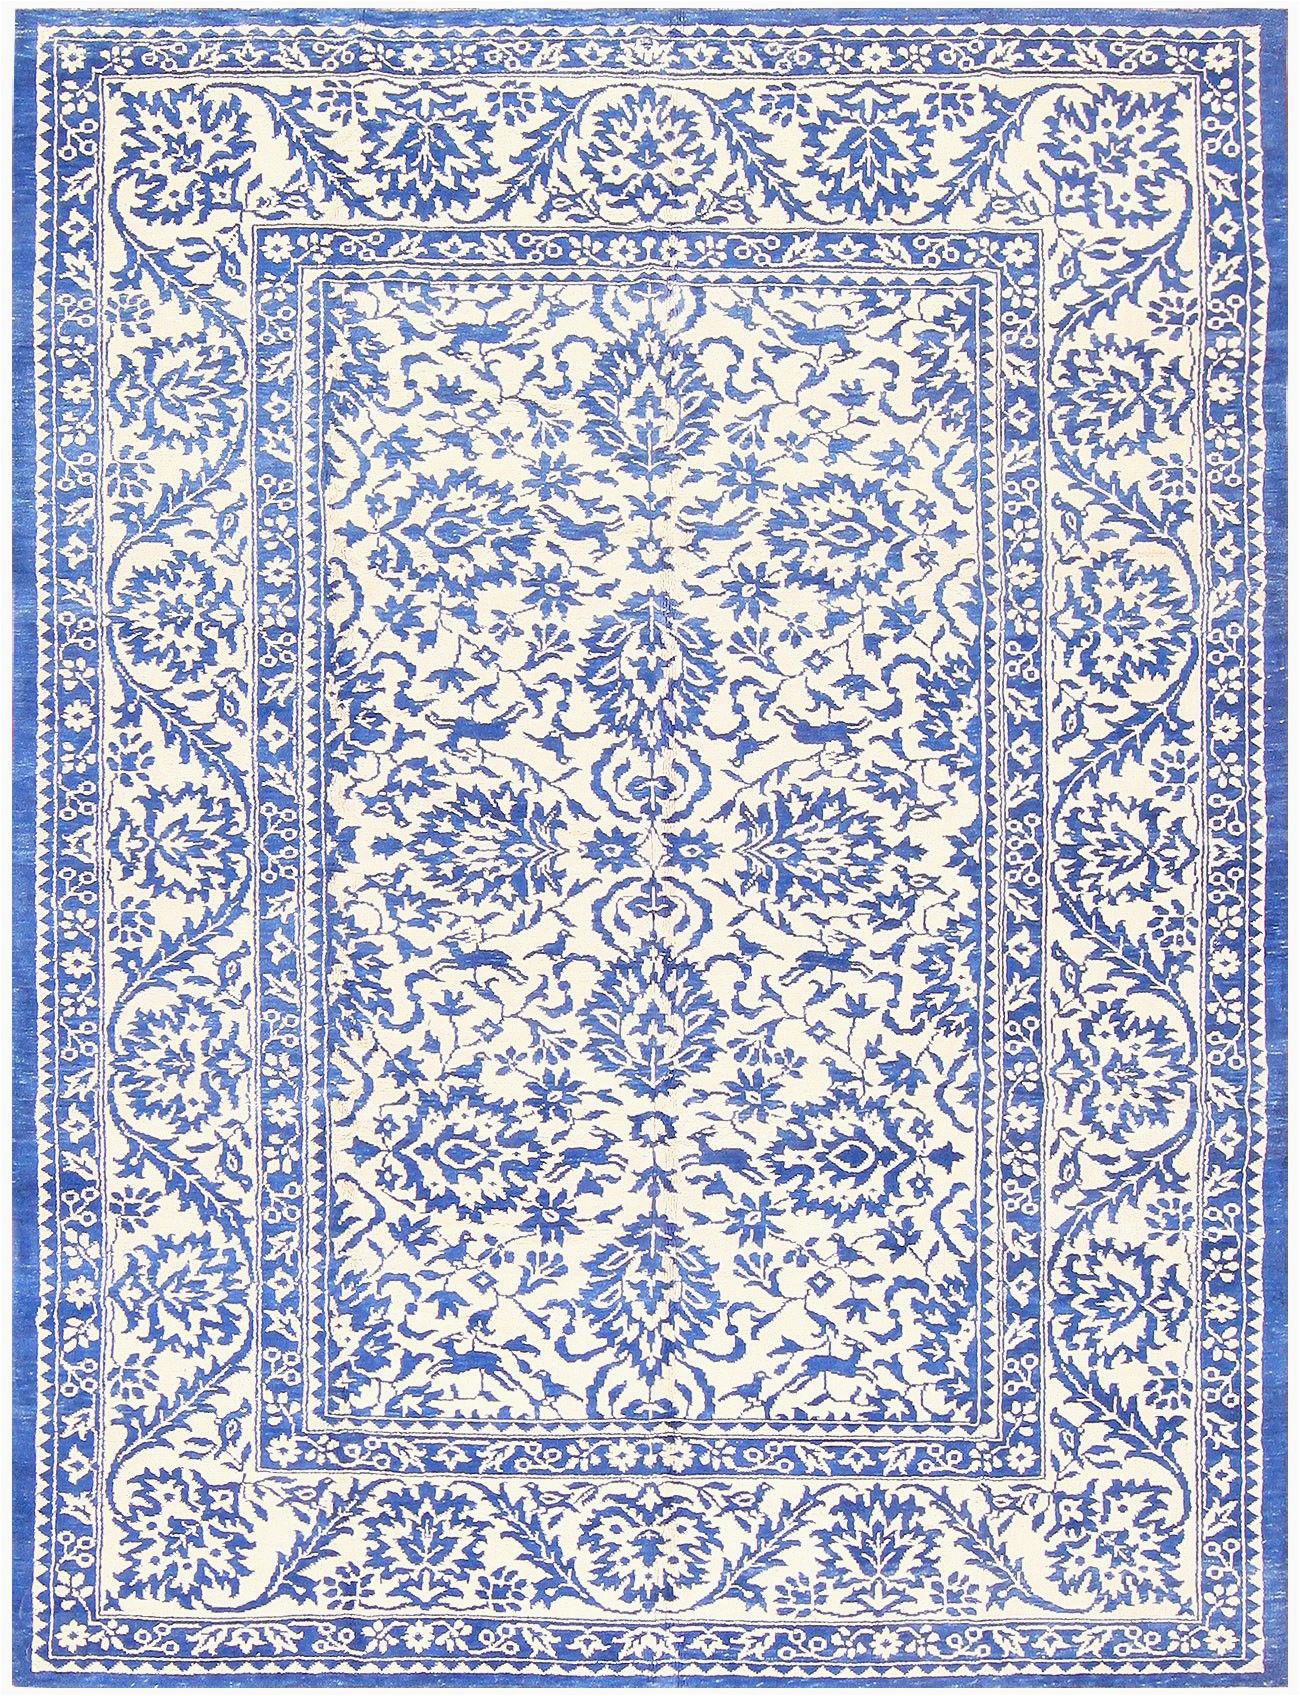 Blue and White Cotton Rug Ivory and Light Blue Vintage Cotton Agra Rug by